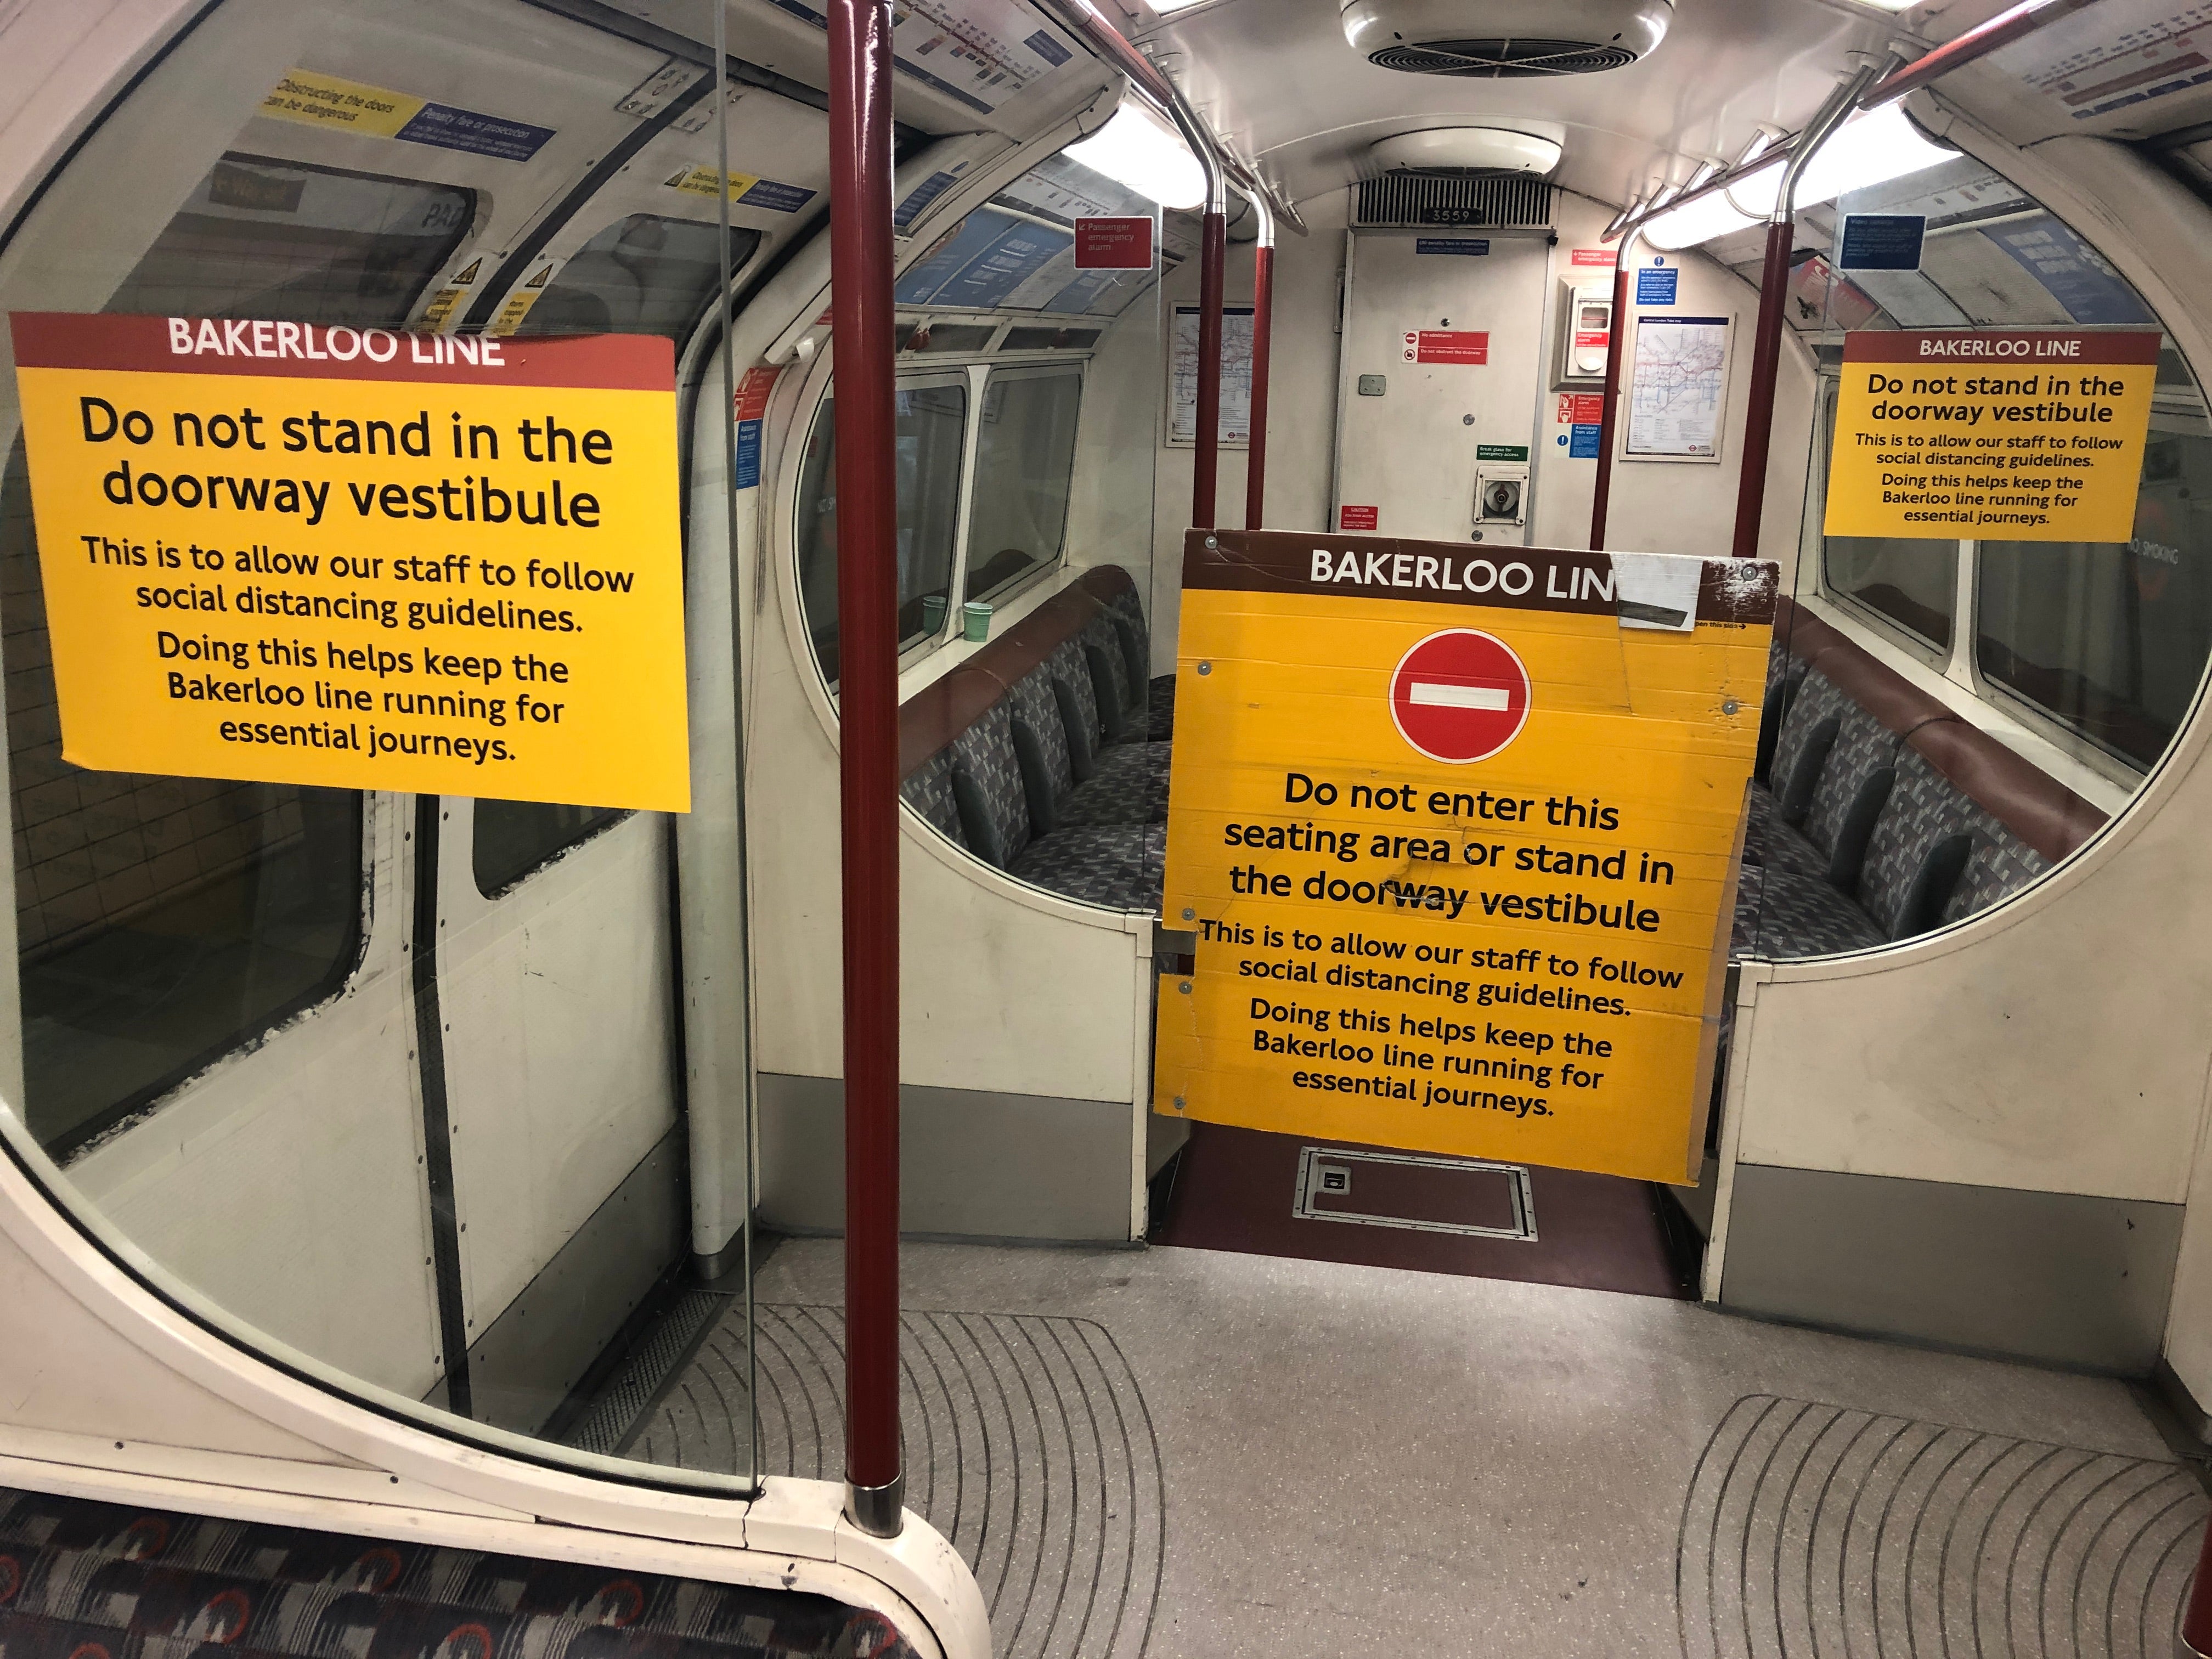 Keep out: warnings to passengers on London’s Bakerloo Line